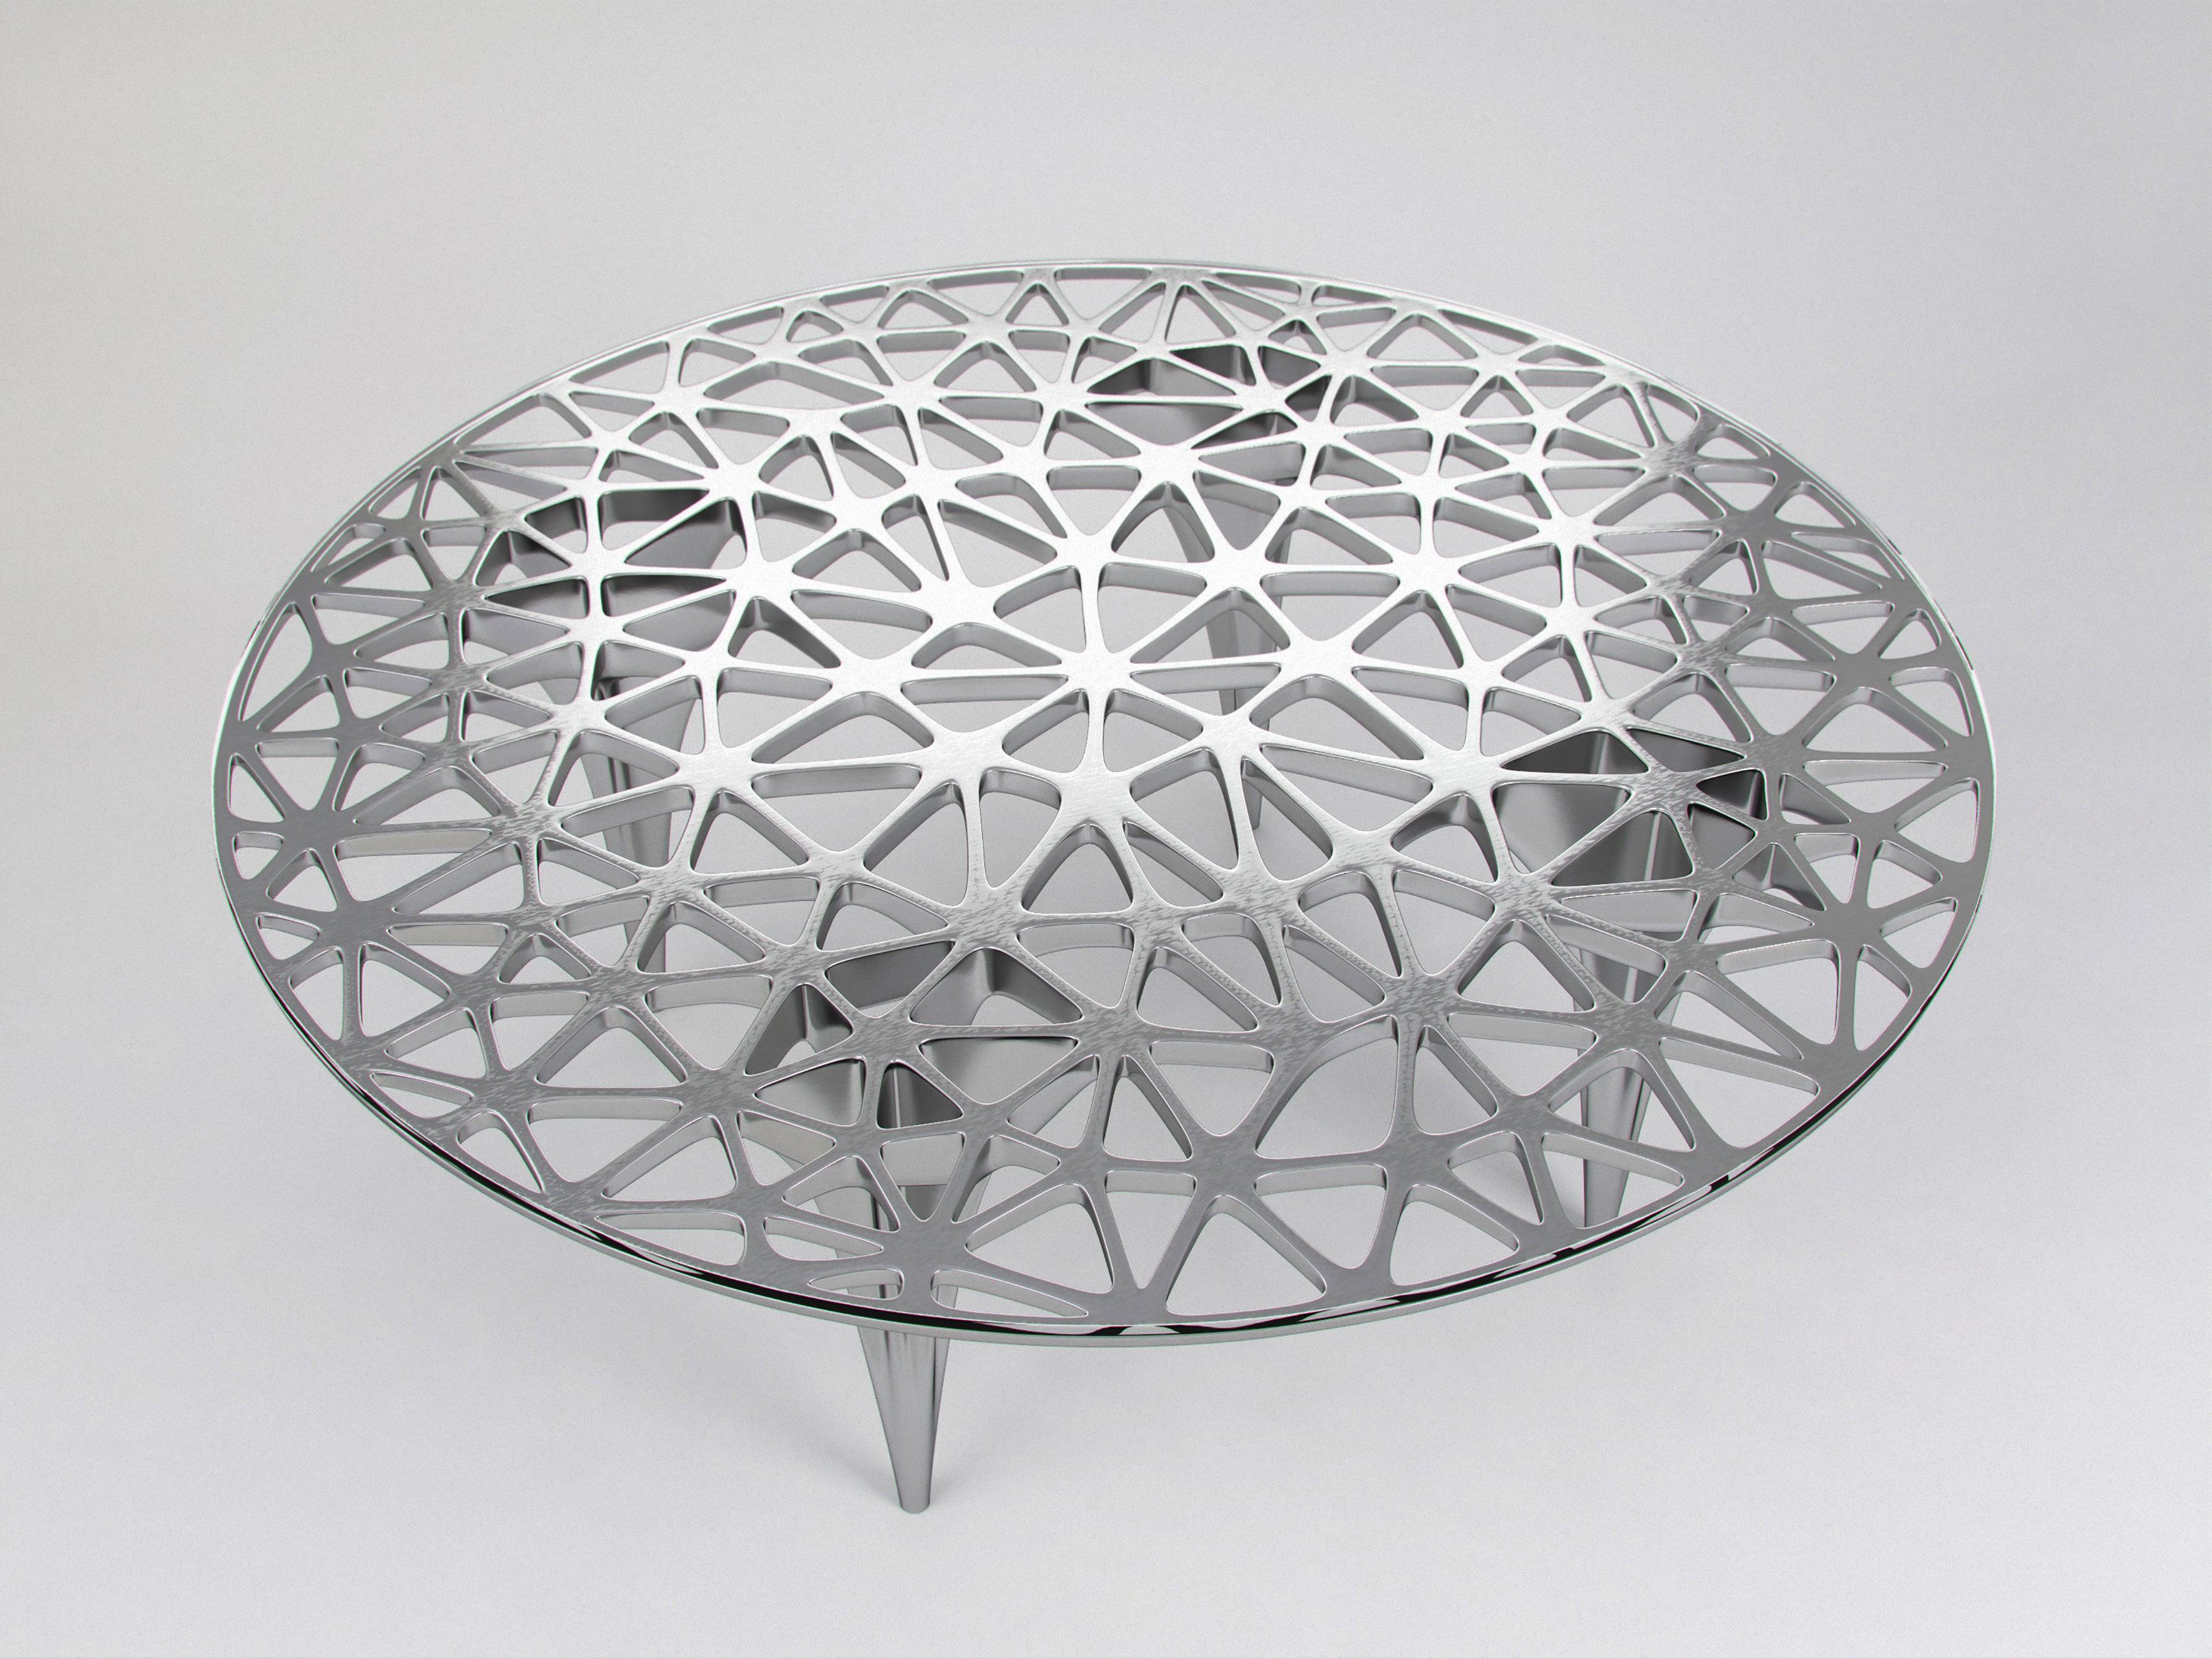 Sedona Stainless Steel Round Coffee Table by Janne Kyttanen In New Condition For Sale In Beverly Hills, CA